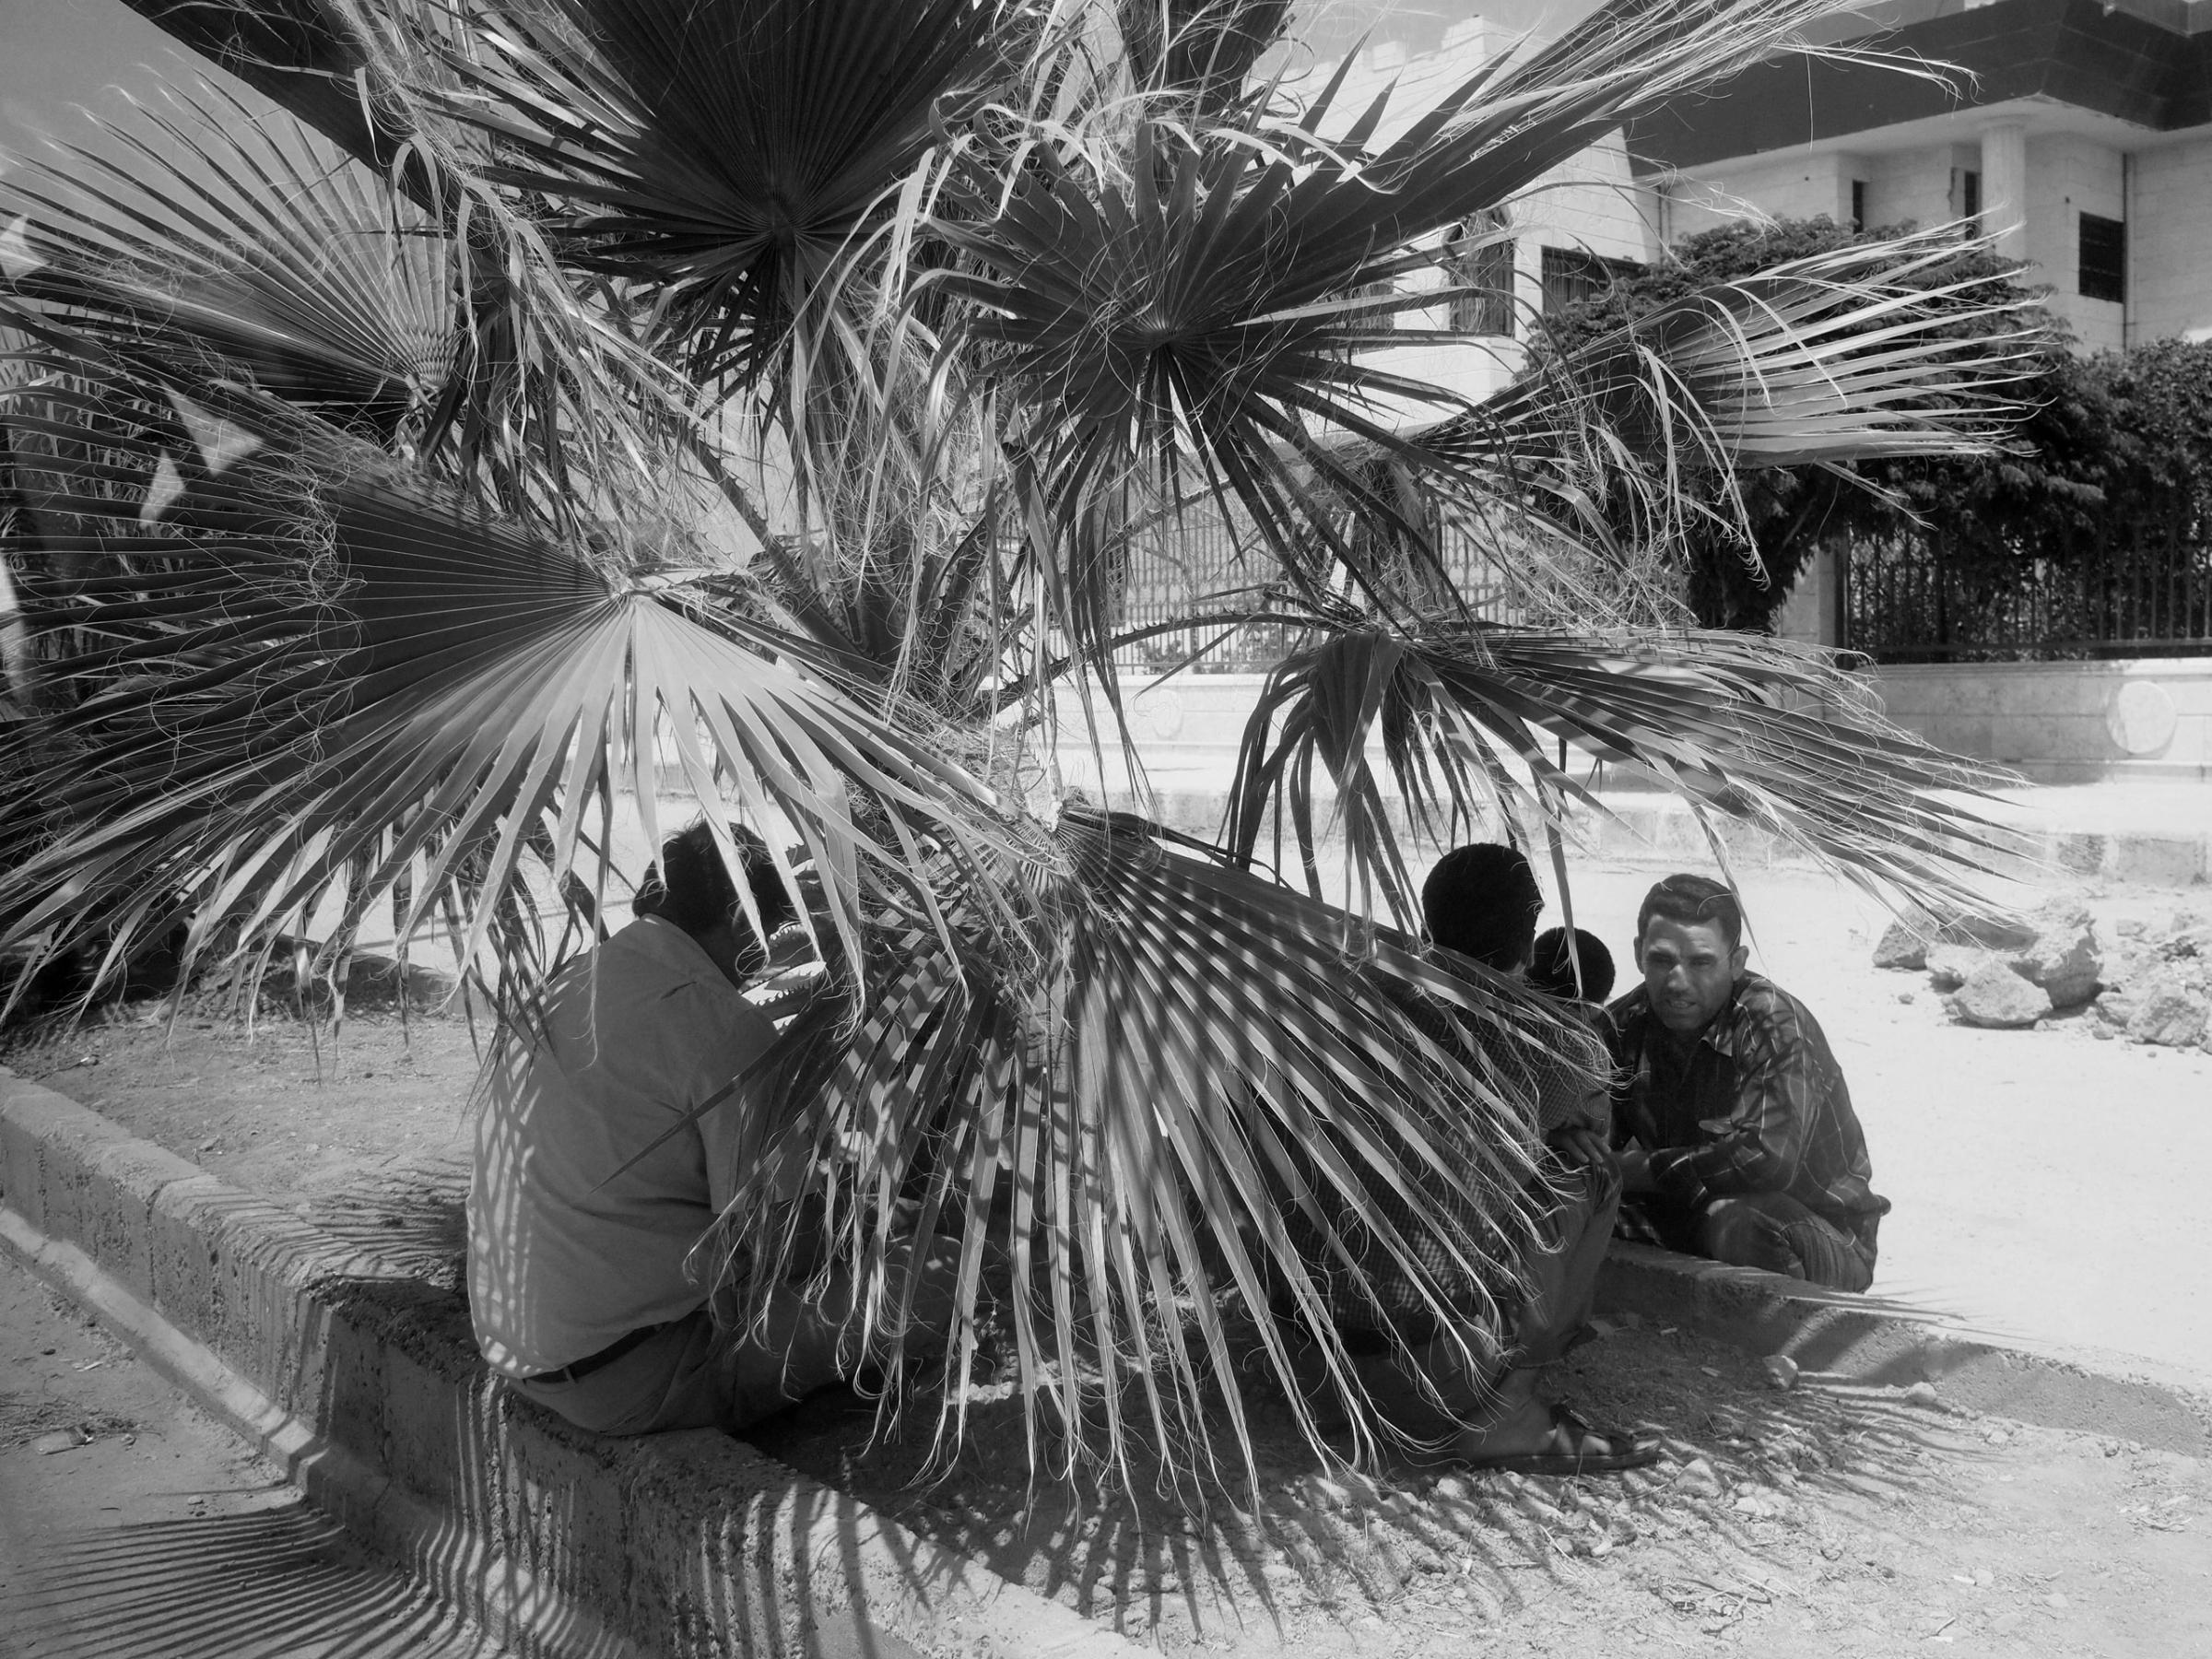 Tal Abyad, Syria. August 8, 2015.Men seek shade under a palm tree in the former Islamic State stronghold of Tal Abyad, re-captured by the Kurdish YPG militia in June of this year.(Photo by Moises Saman/MAGNUM)